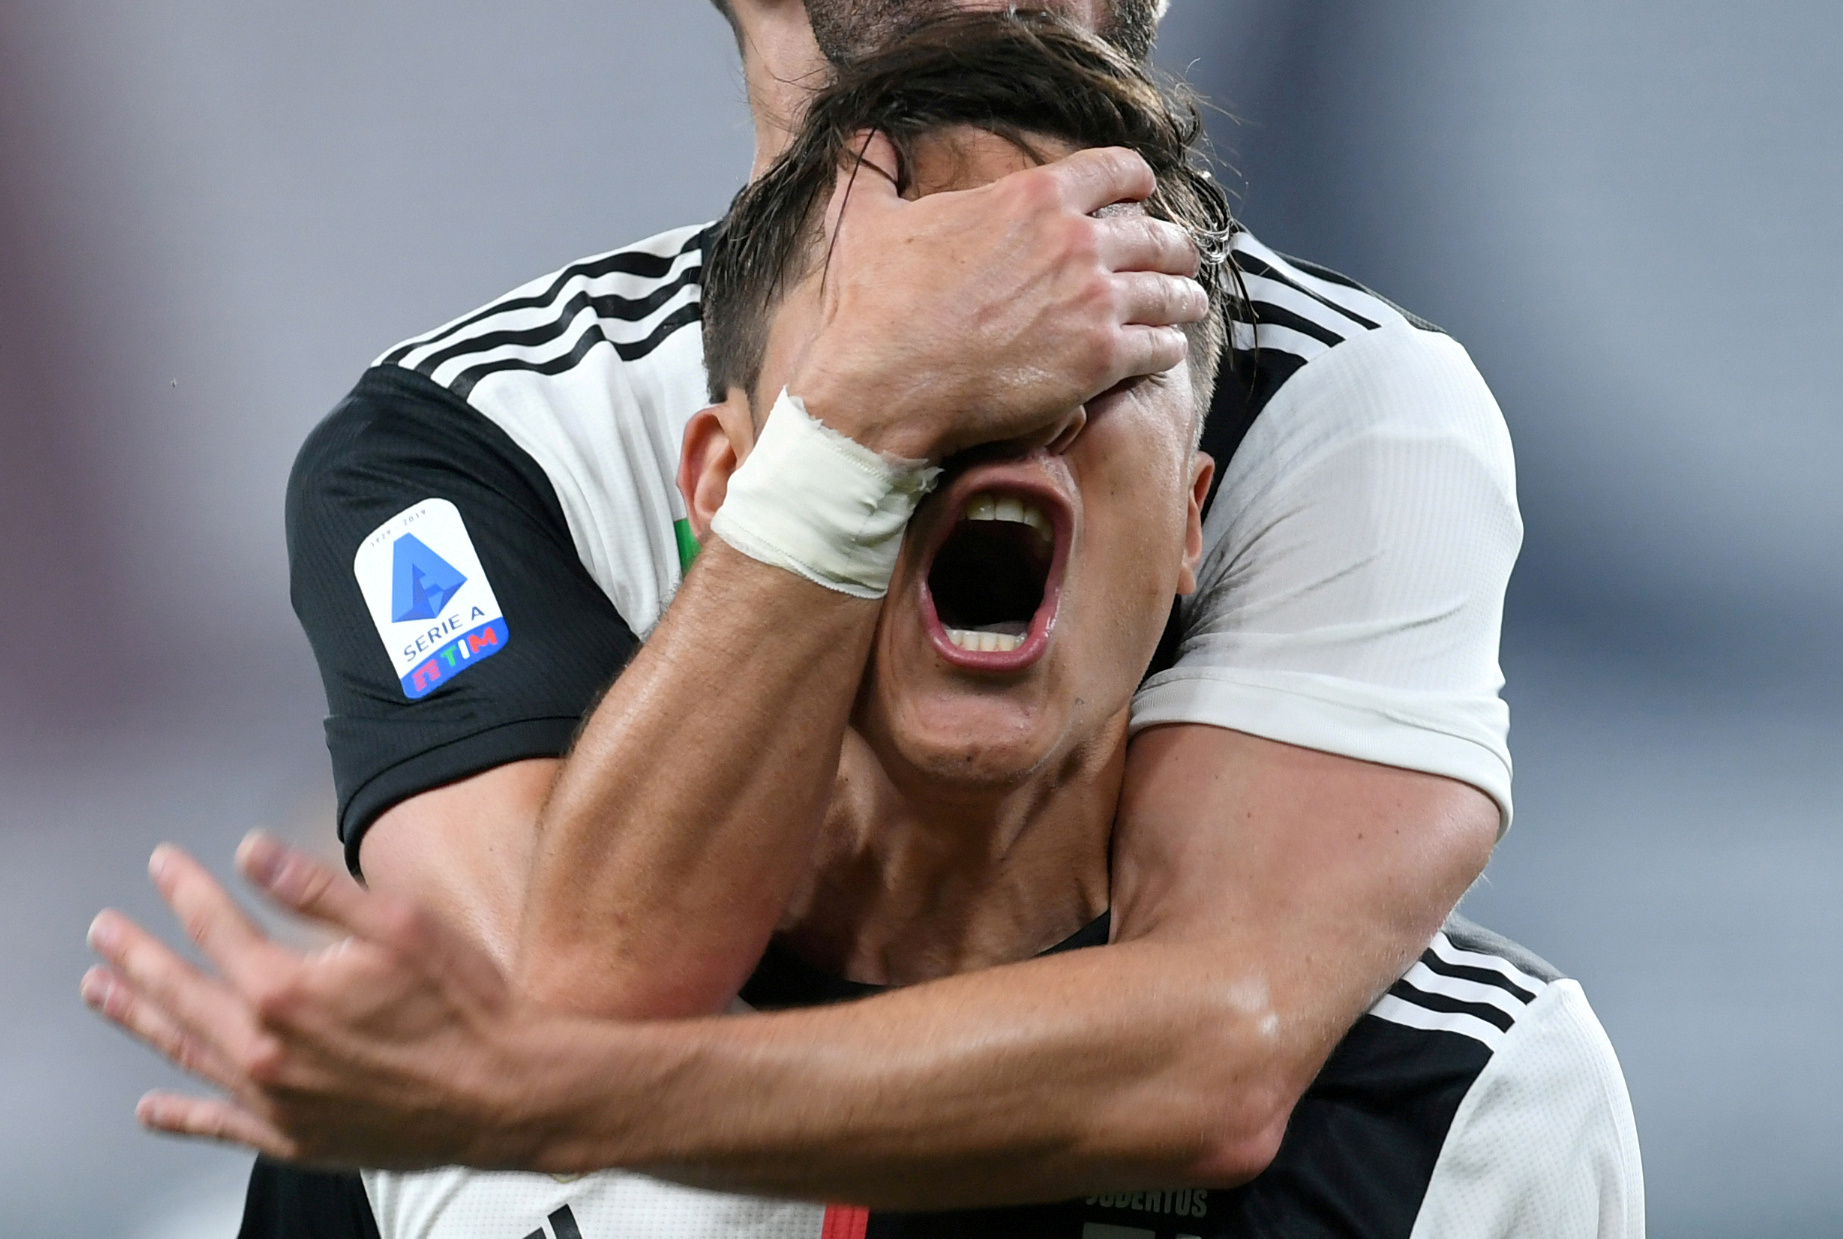 Juventus' Paulo Dybala celebrates scoring their first goal with Miralem Pjanic, as play resumes behind closed doors following the outbreak of the coronavirus disease (COVID-19) during the Serie A match between Genoa and Juventus, at Stadio Comunale Luigi Ferraris, in Genoa, Italy, on June 30, 2020. Photo: Reuters